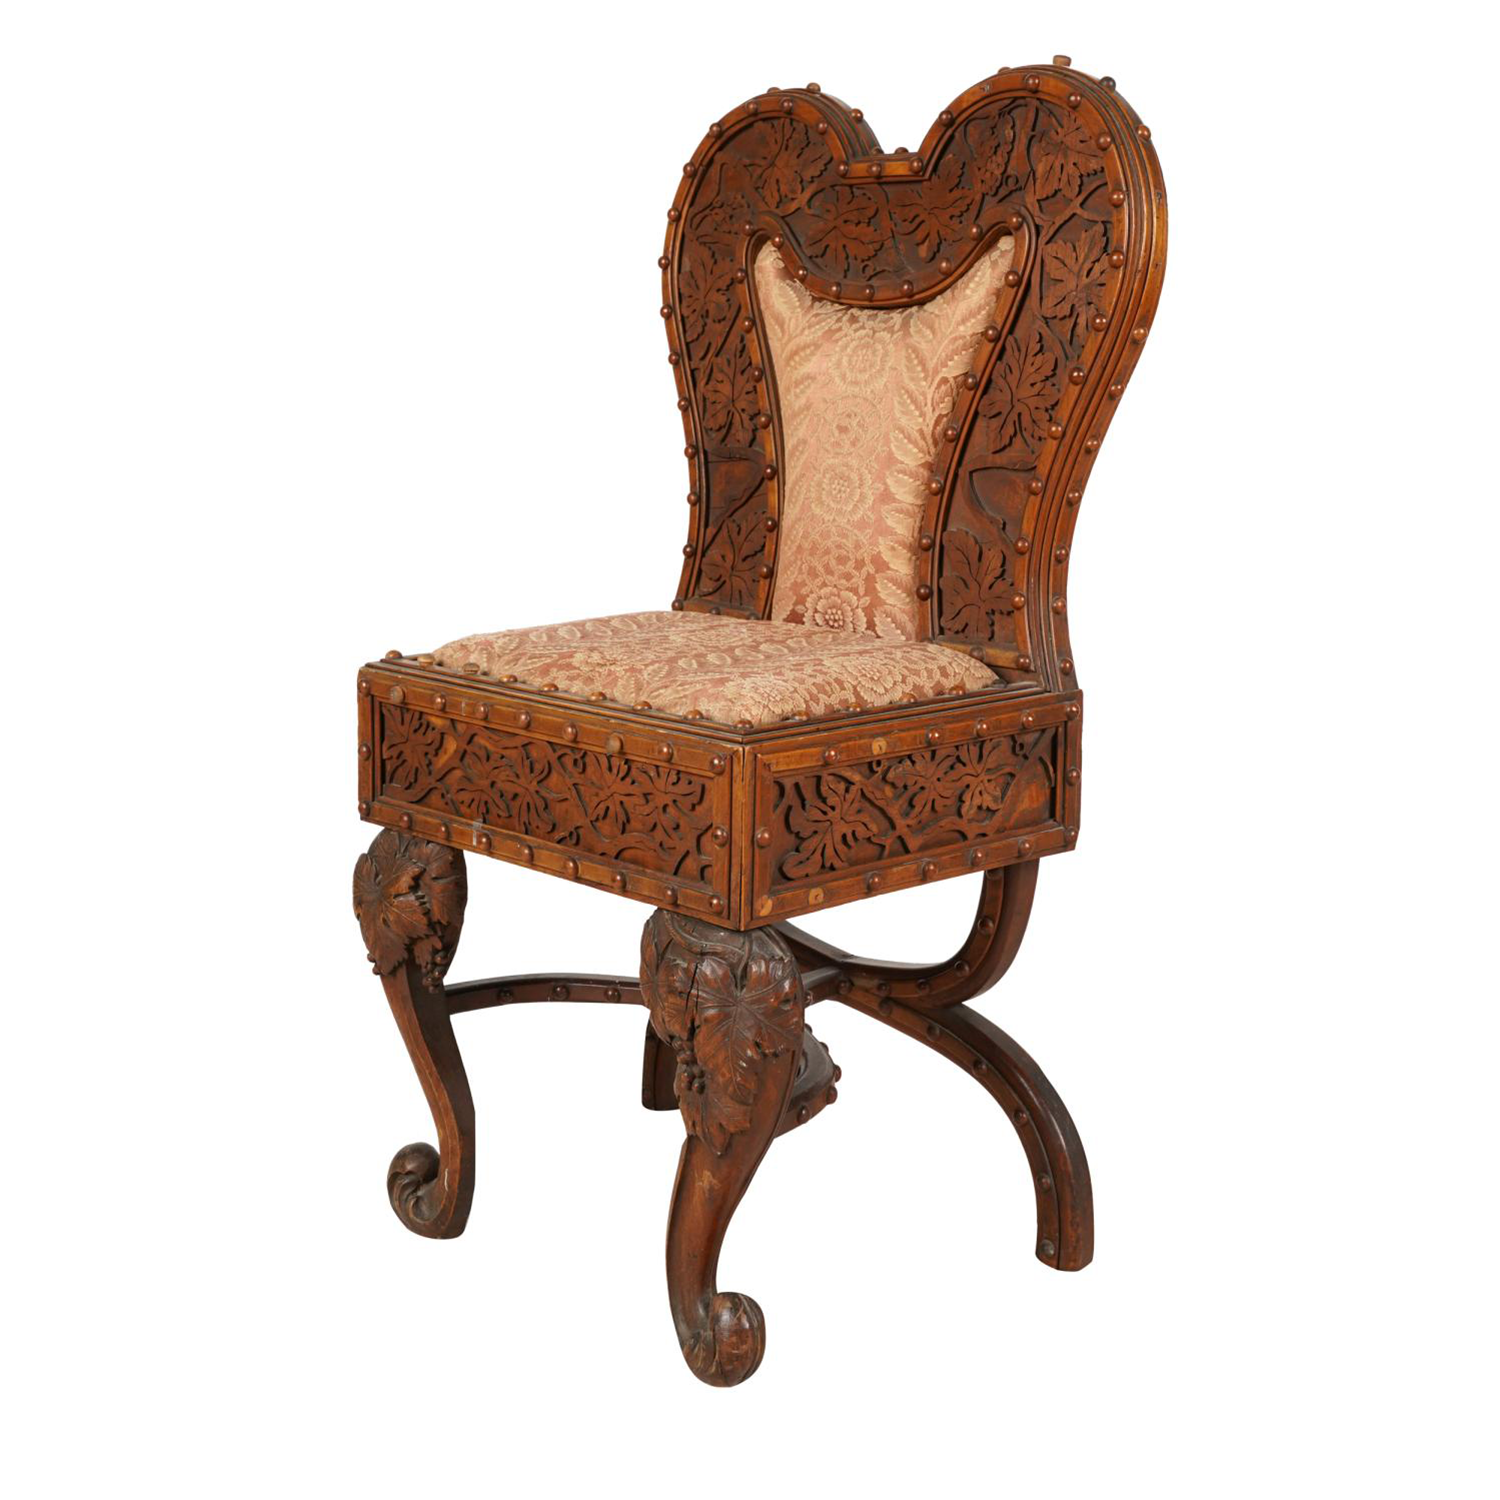 ANTIQUE AMERICAN VICTORIAN CHAIR | Work of Man